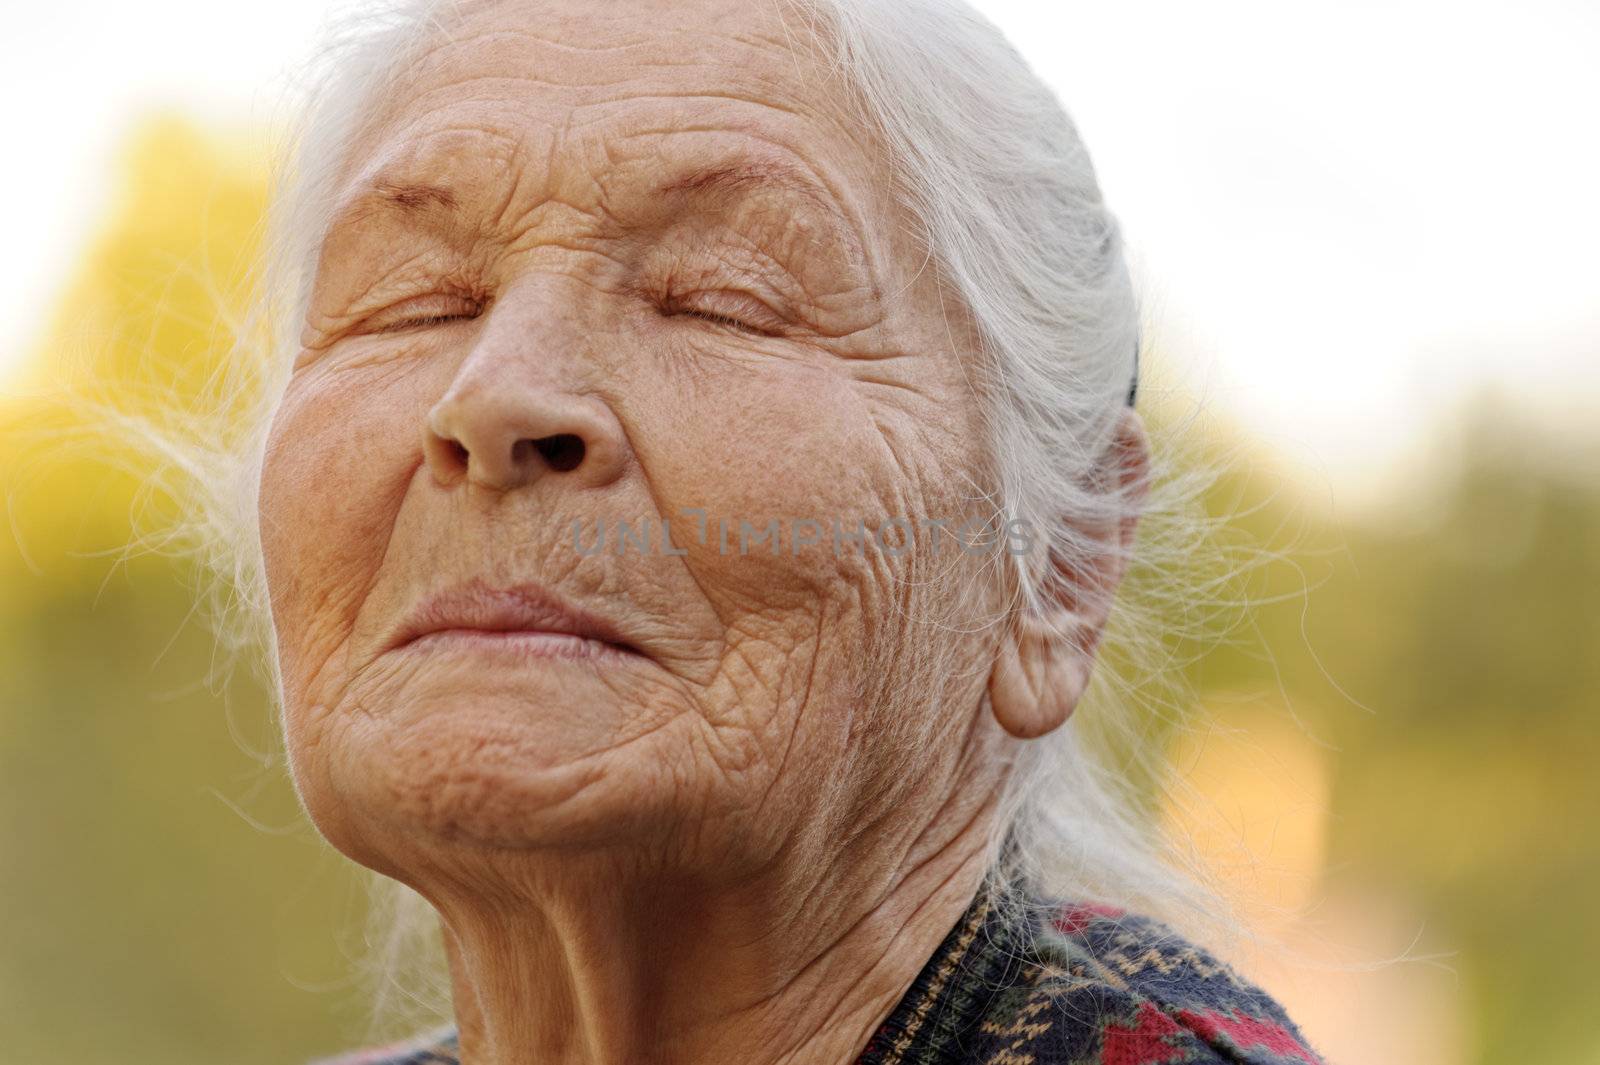 The elderly woman with closed eyes. A photo outdoors